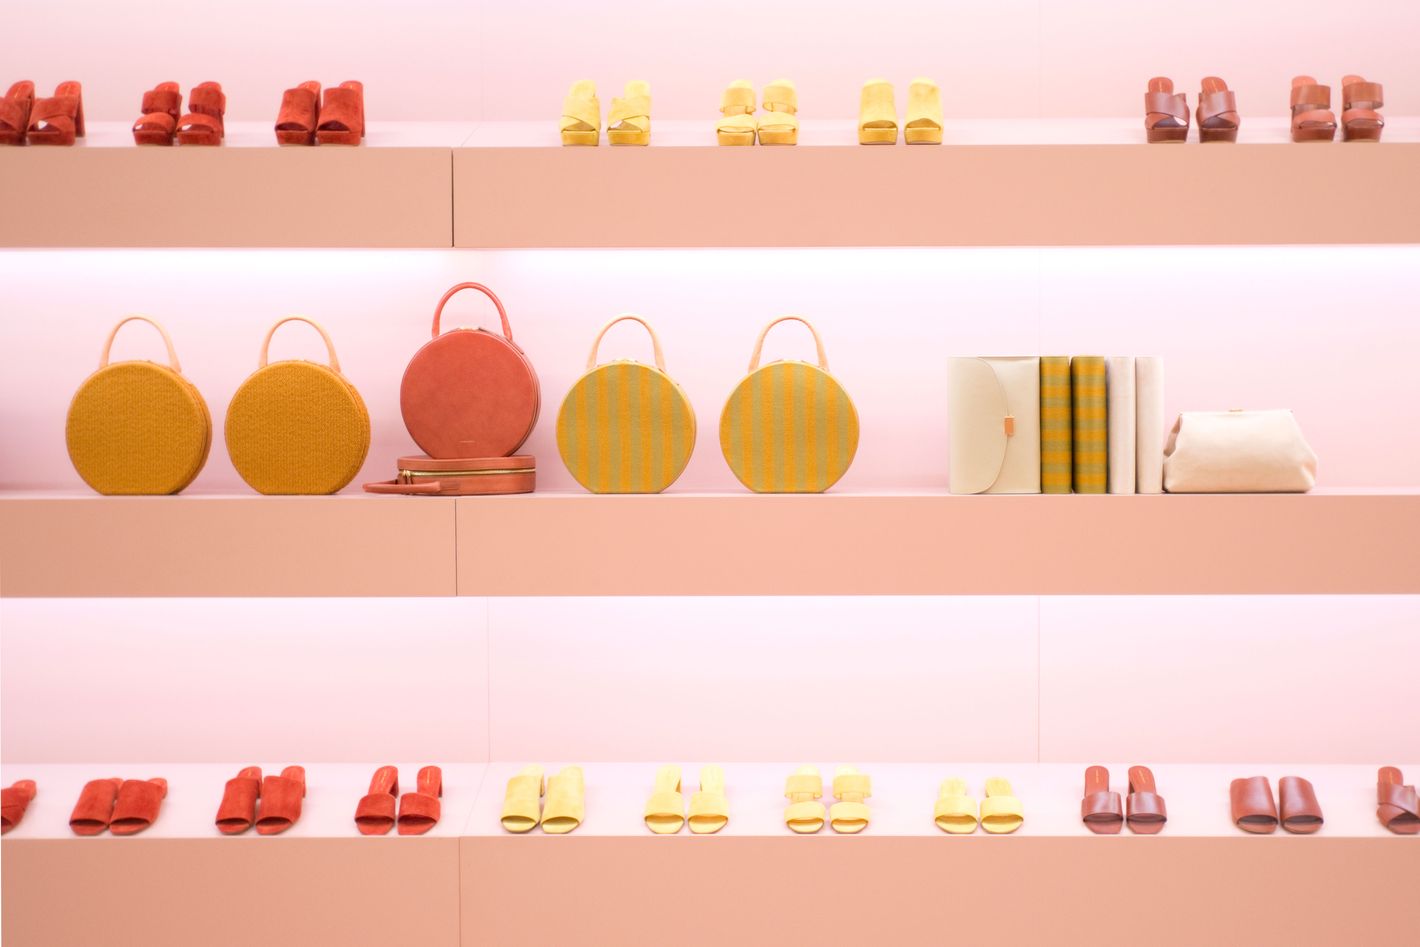 Mansur Gavriel Is Expanding into Clothing